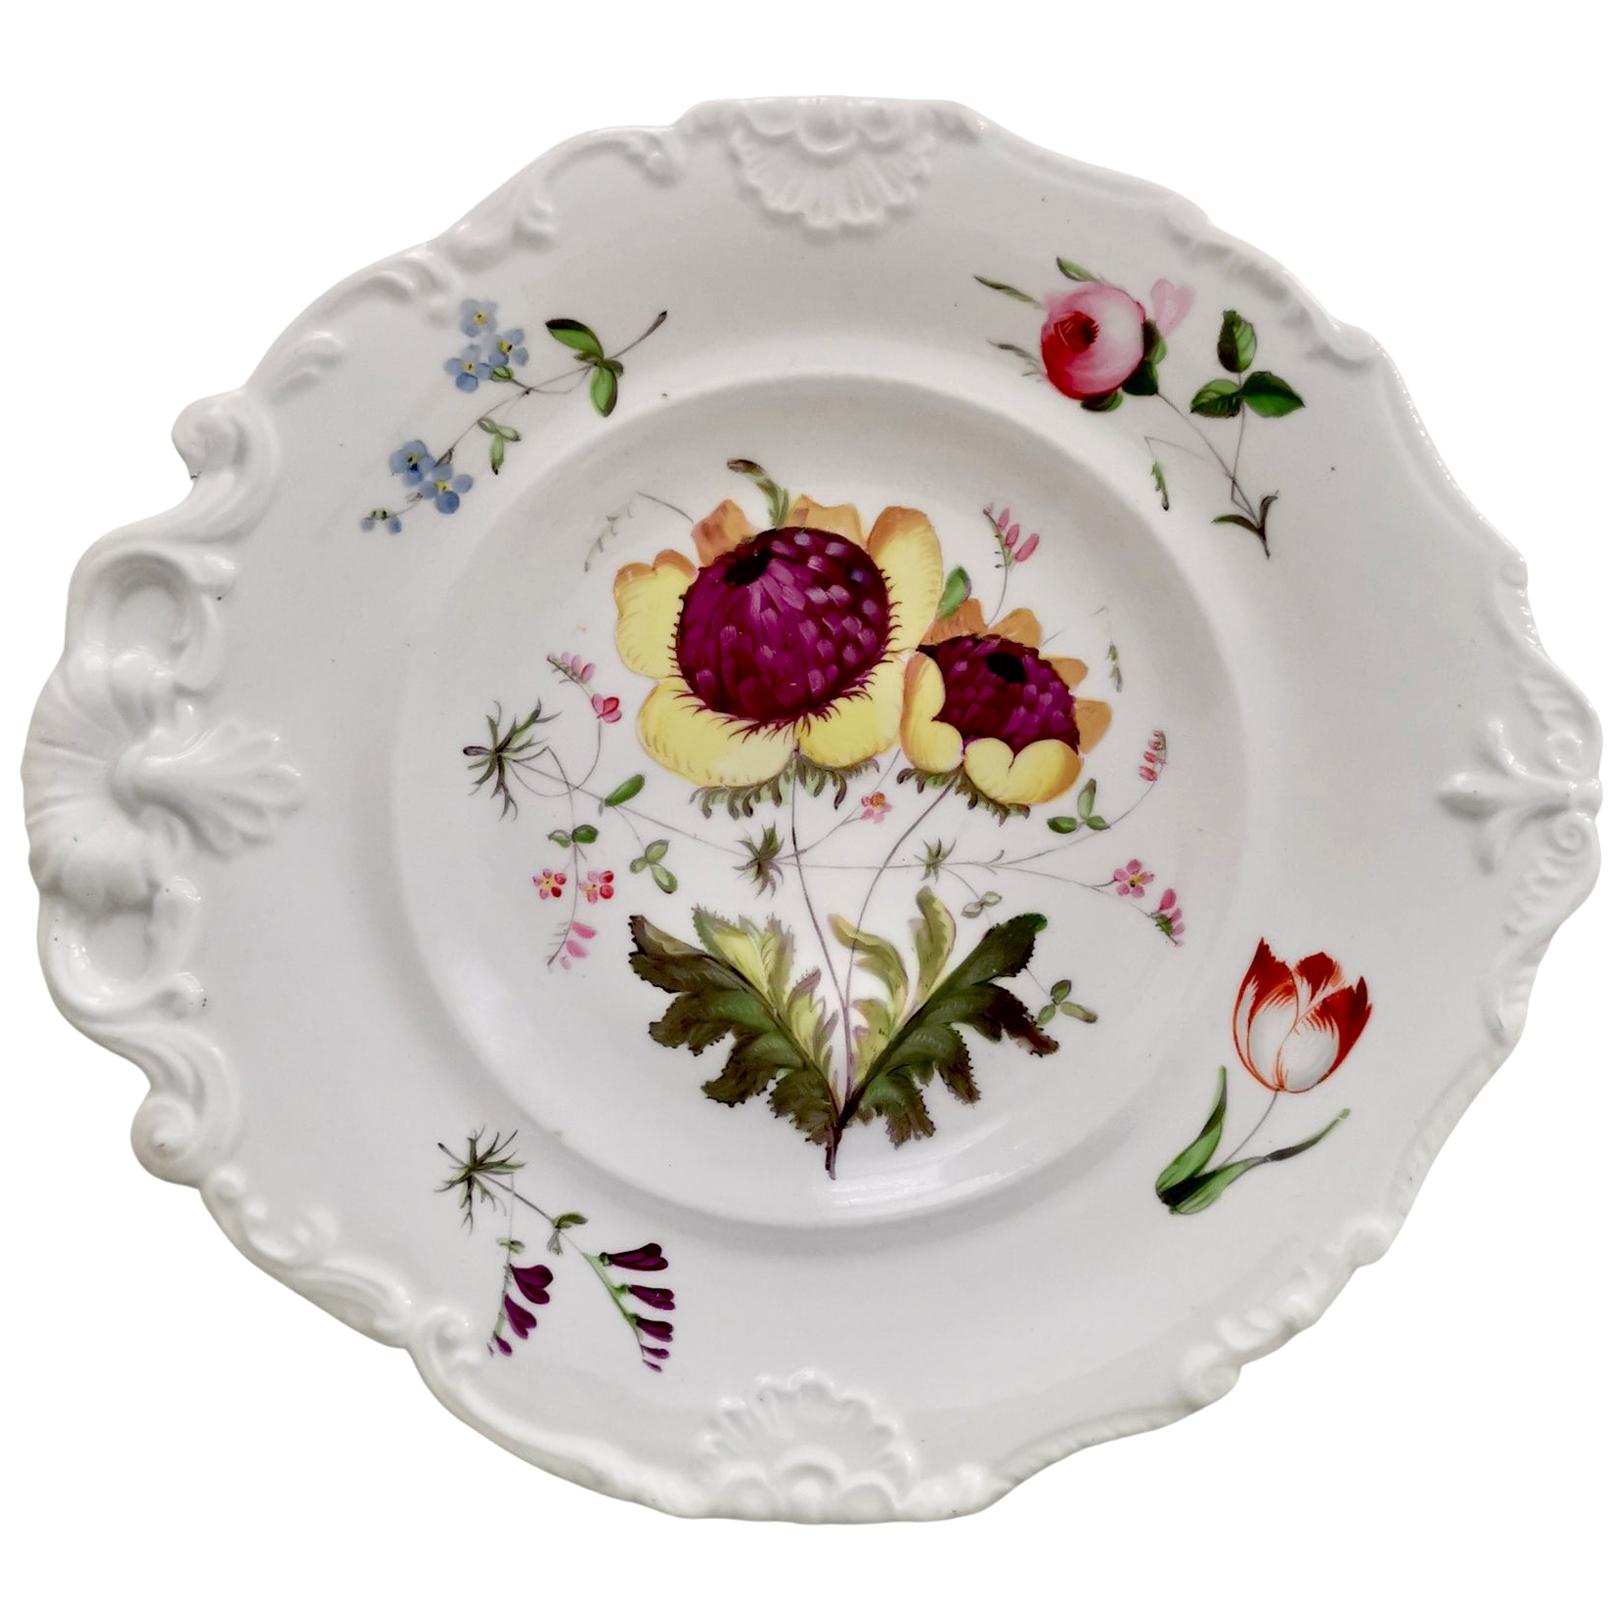 New Hall Porcelain Plate, White with Flowers, Inverted Shell, Regency circa 1820